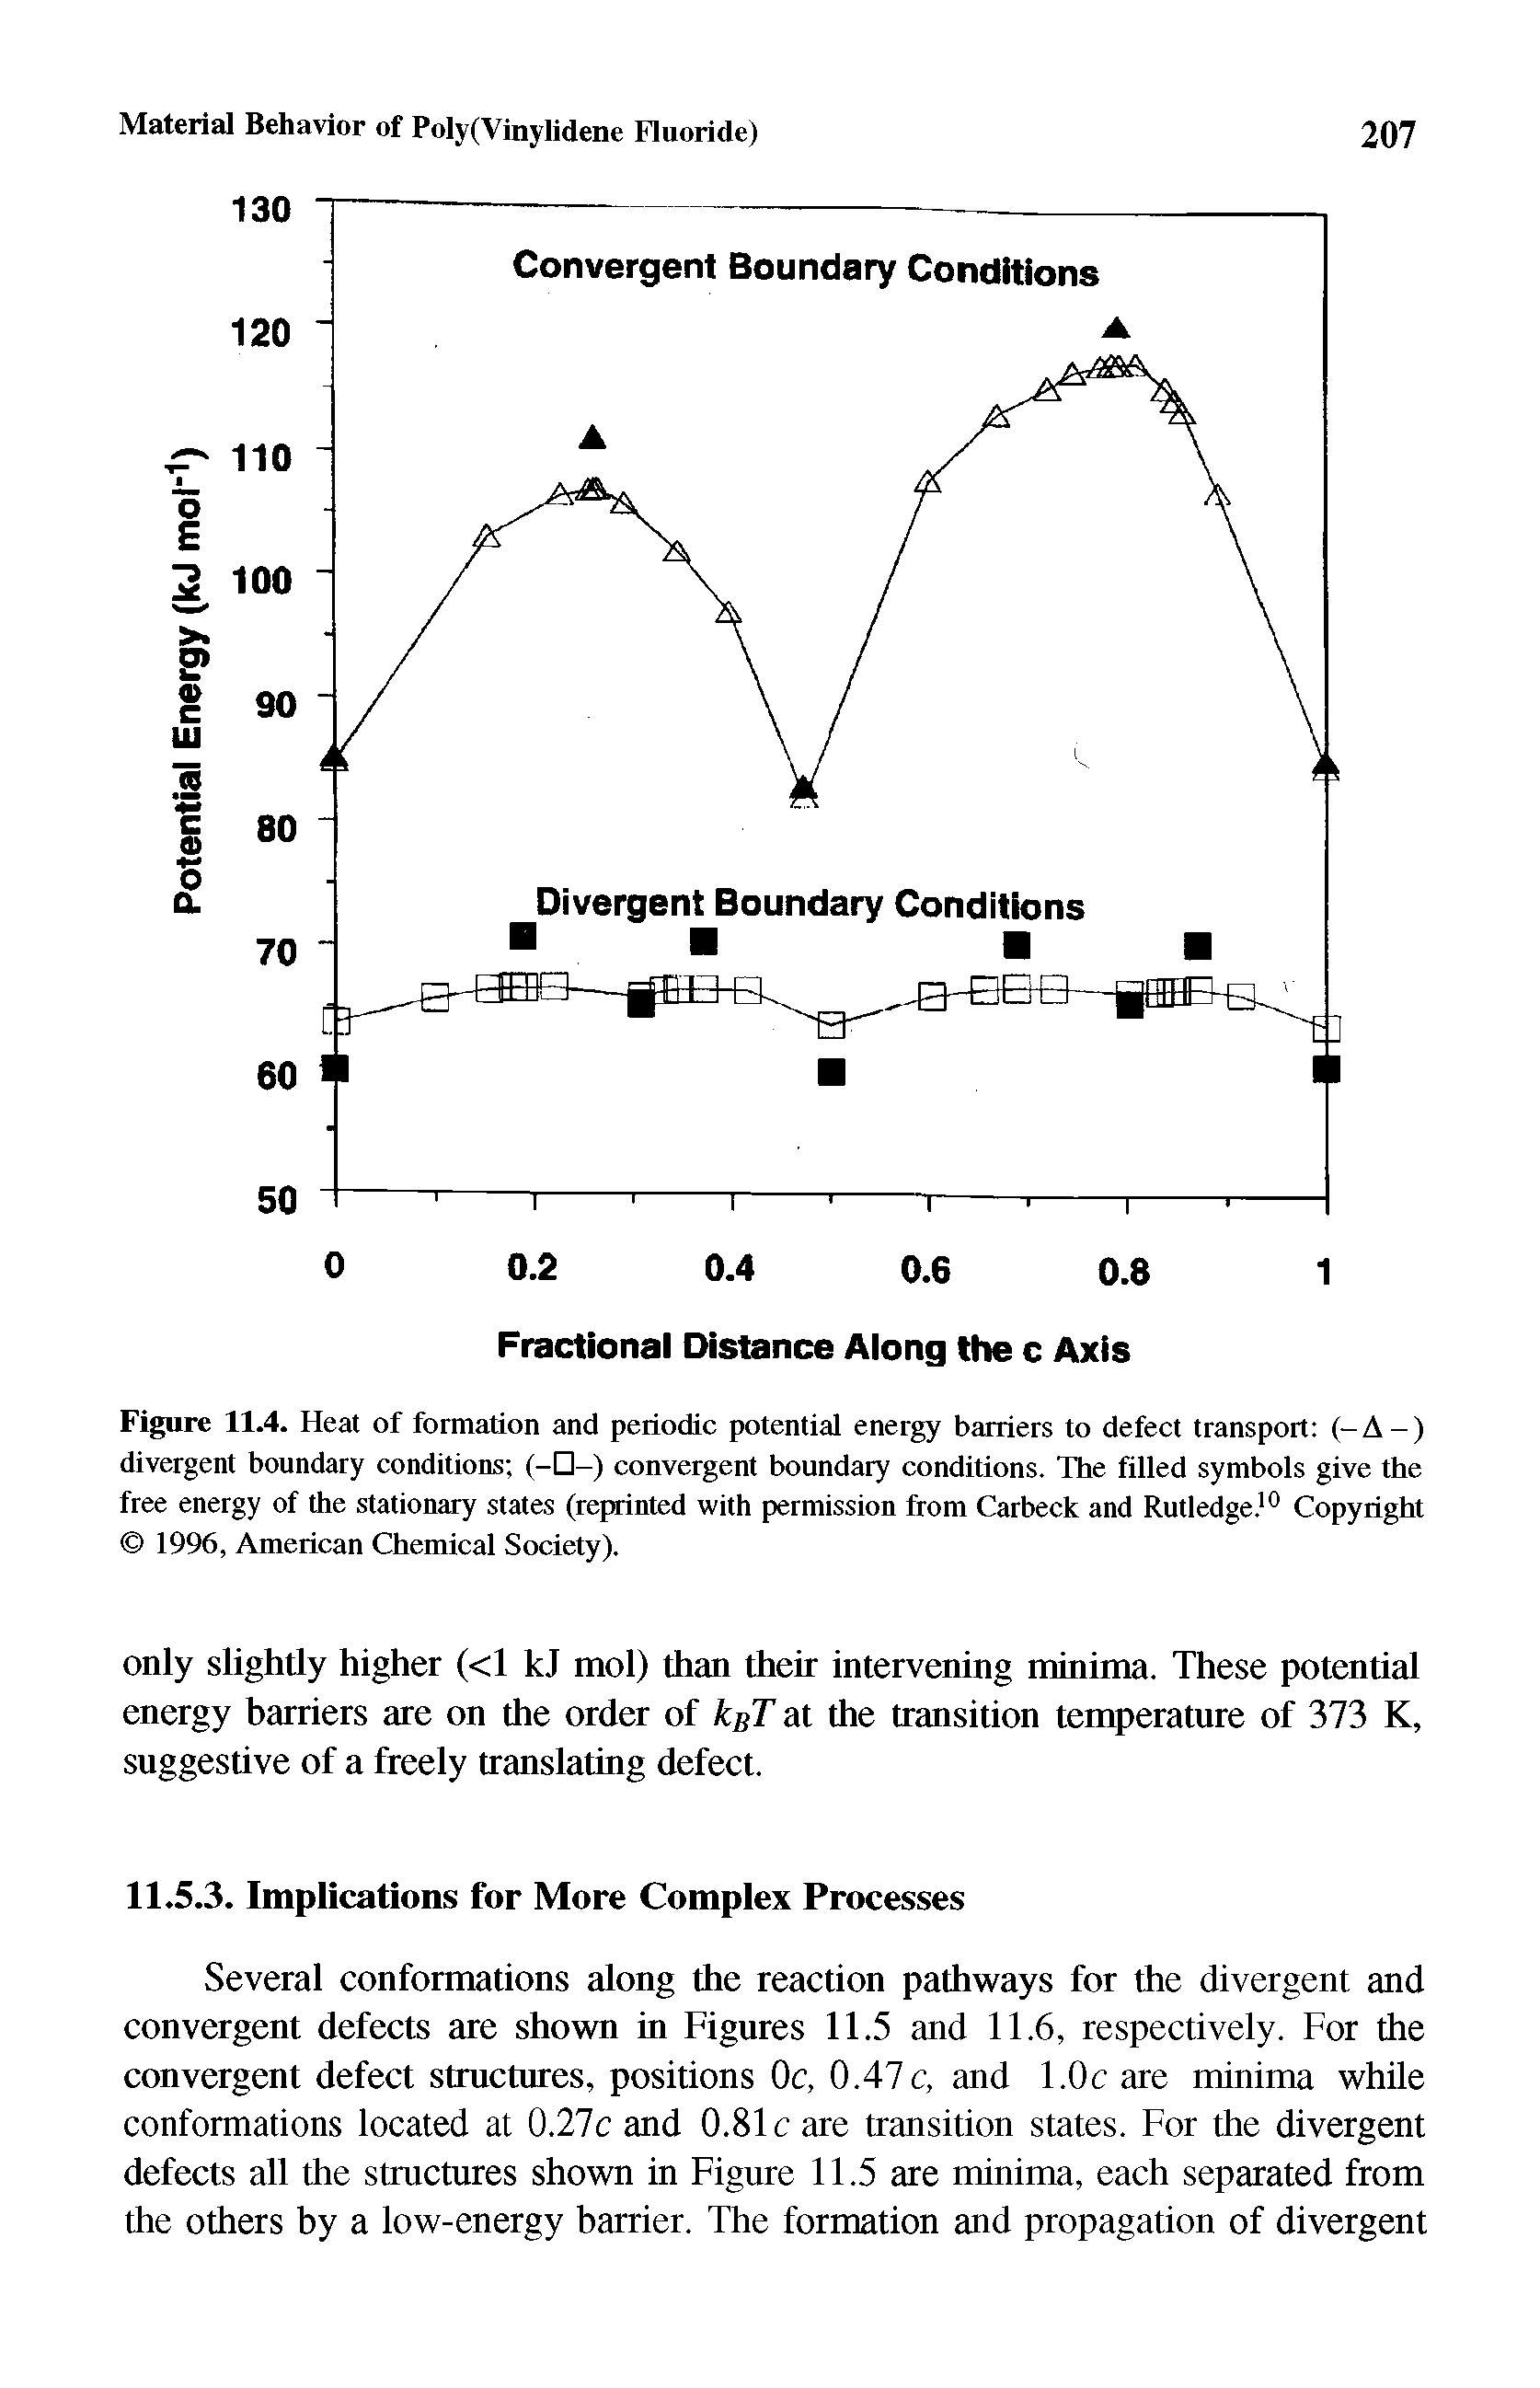 Figure 11.4. Heat of formation and periodic potential energy barriers to defect transport (-A-) divergent boundary conditions (- -) convergent boundary conditions. The filled symbols give the free energy of the stationary states (reprinted with permission from Carbeck and Rutledge. Copyright 1996, American Chemical Society).